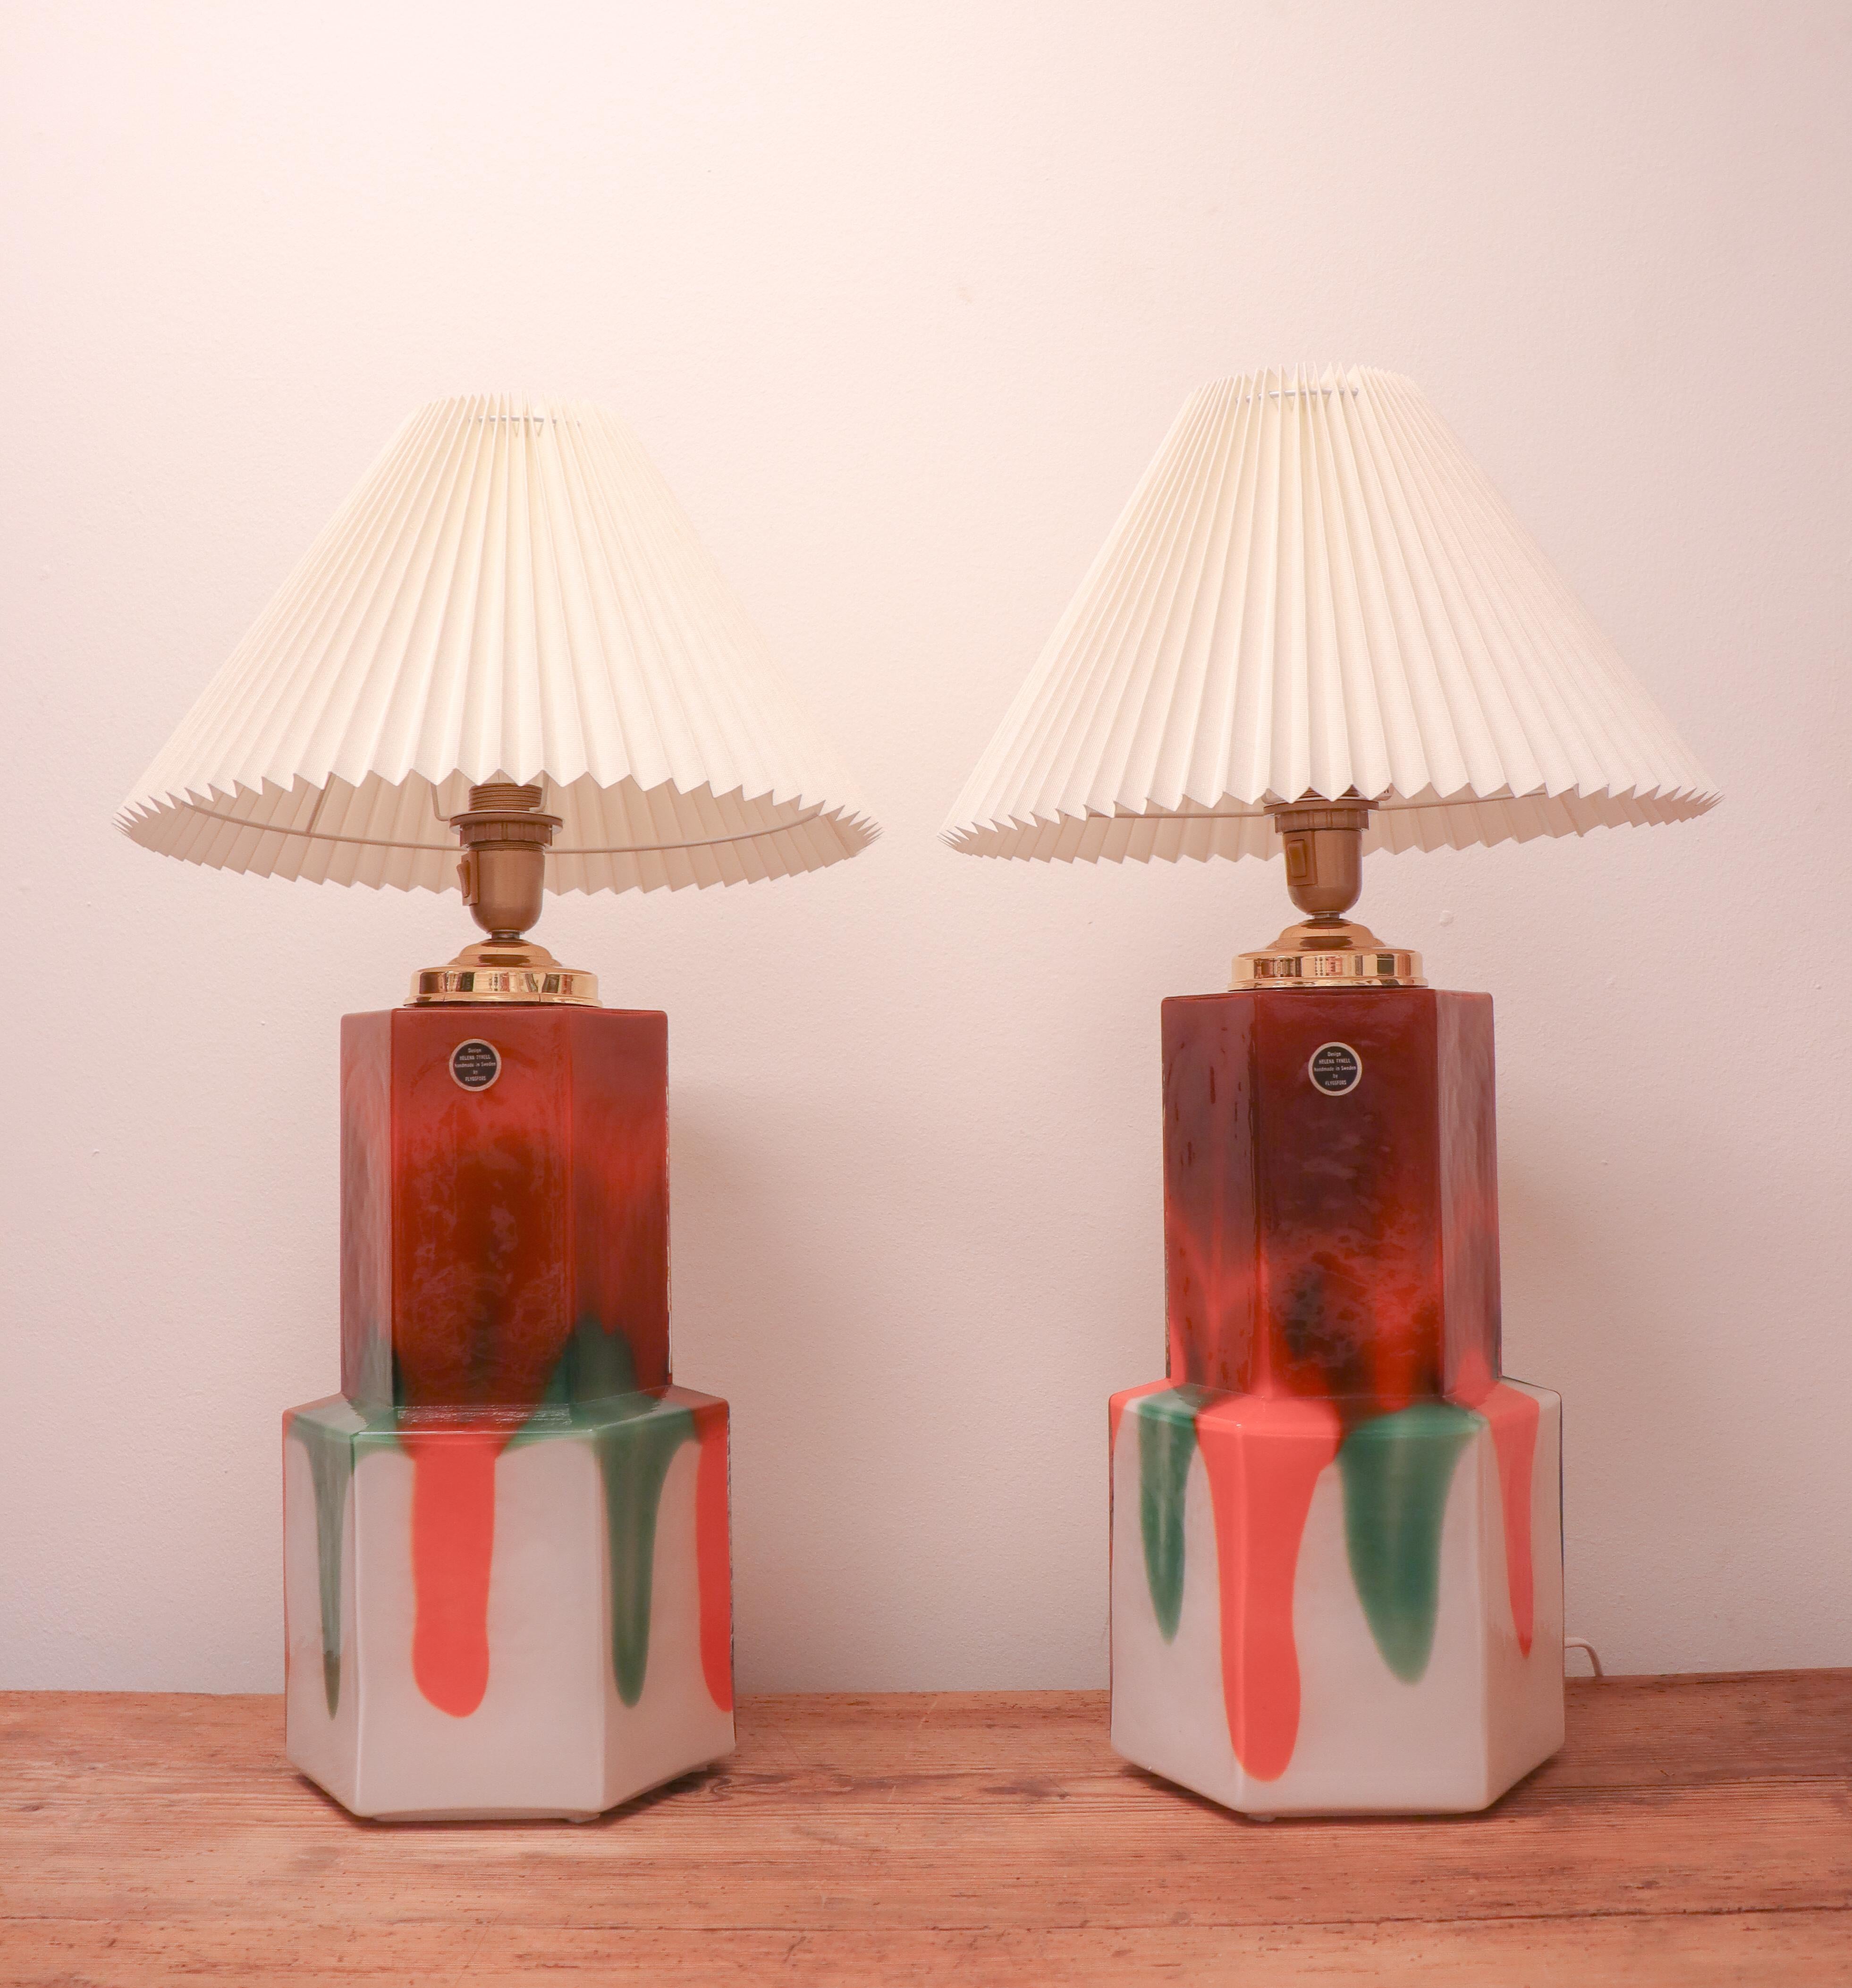 A pair of table lamps in glass designed by Helena Tynell att Flygsfors glassworks in Sweden in the 1970s. Excluding the lampshades they are 51 cm high and about 18 cm in diameter. They are both label-marked and in excellent condition. 
